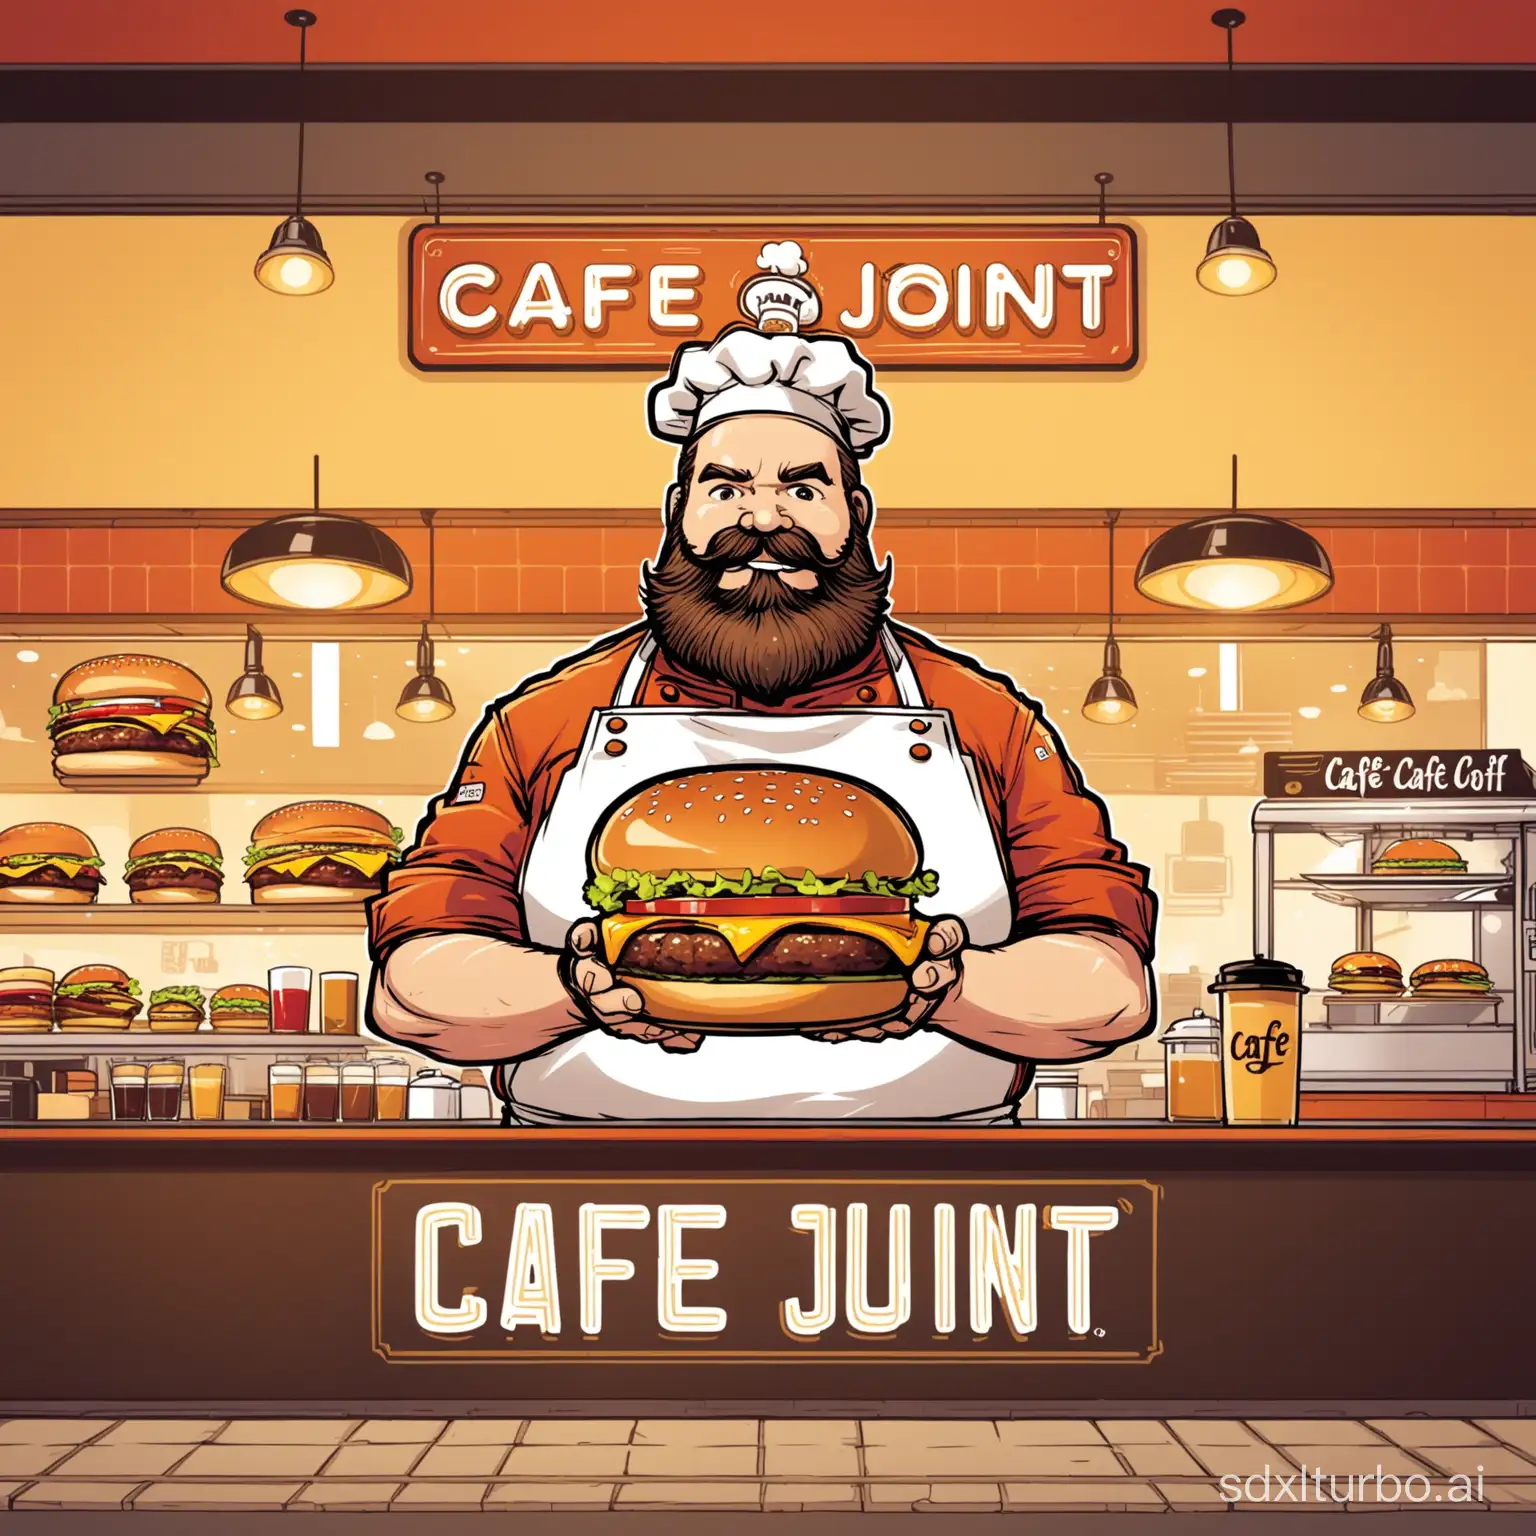 Bustling-Burger-Joint-Comicinspired-Cafe-with-Burly-Bearded-Chef